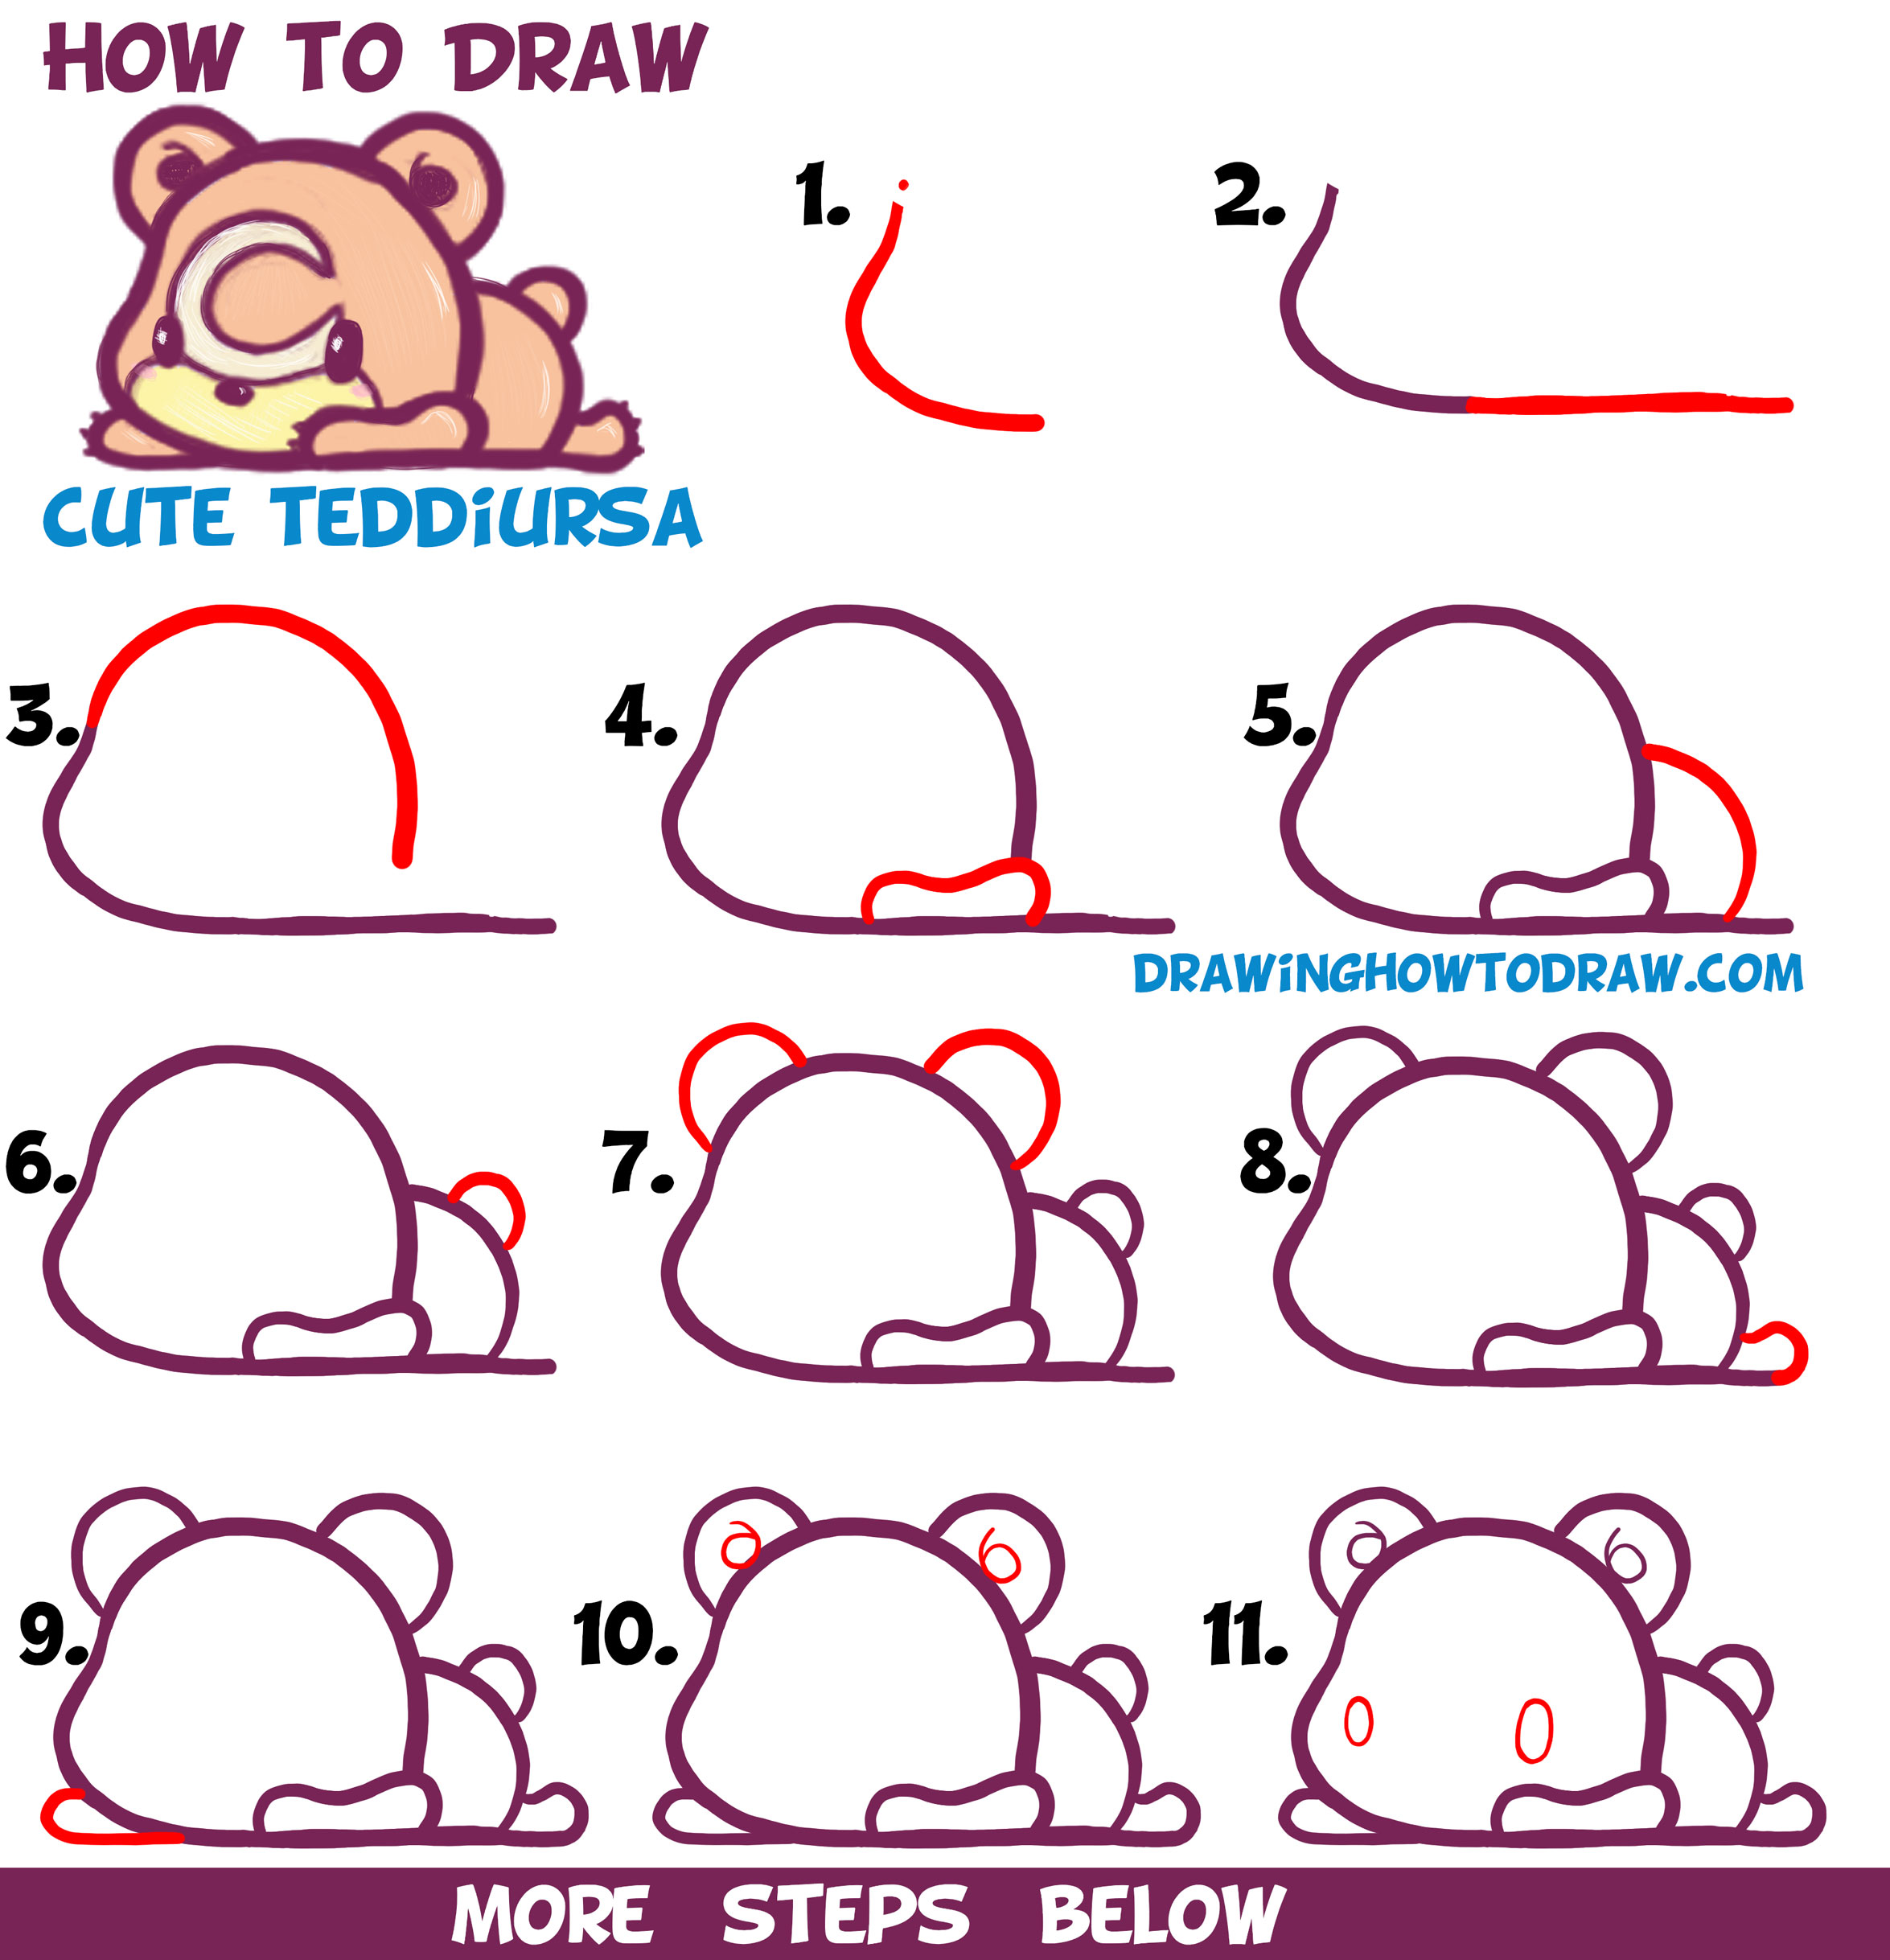 Learn How to Draw Cute Teddiursa Pokemon with Easy Step by Step Drawing Tutorial for Kids & Beginners